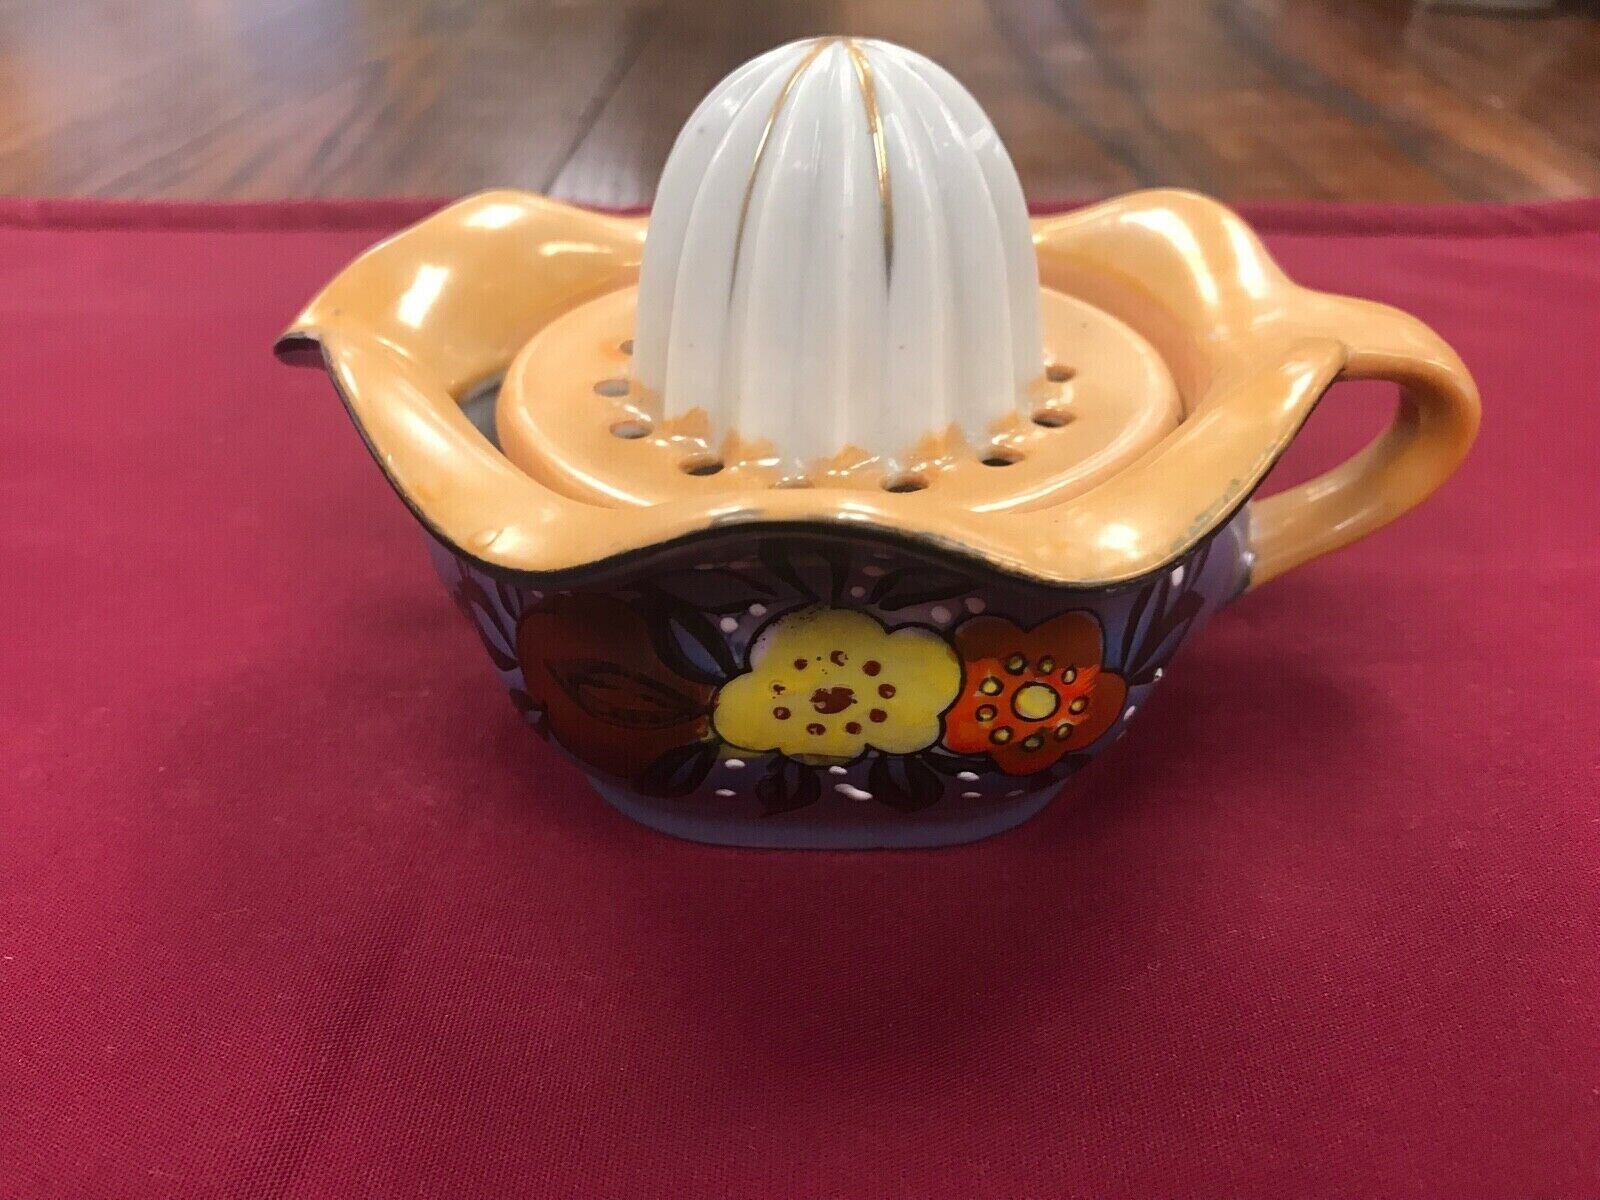 Blue & Gold Juicer Reamer Flowers China from Japan